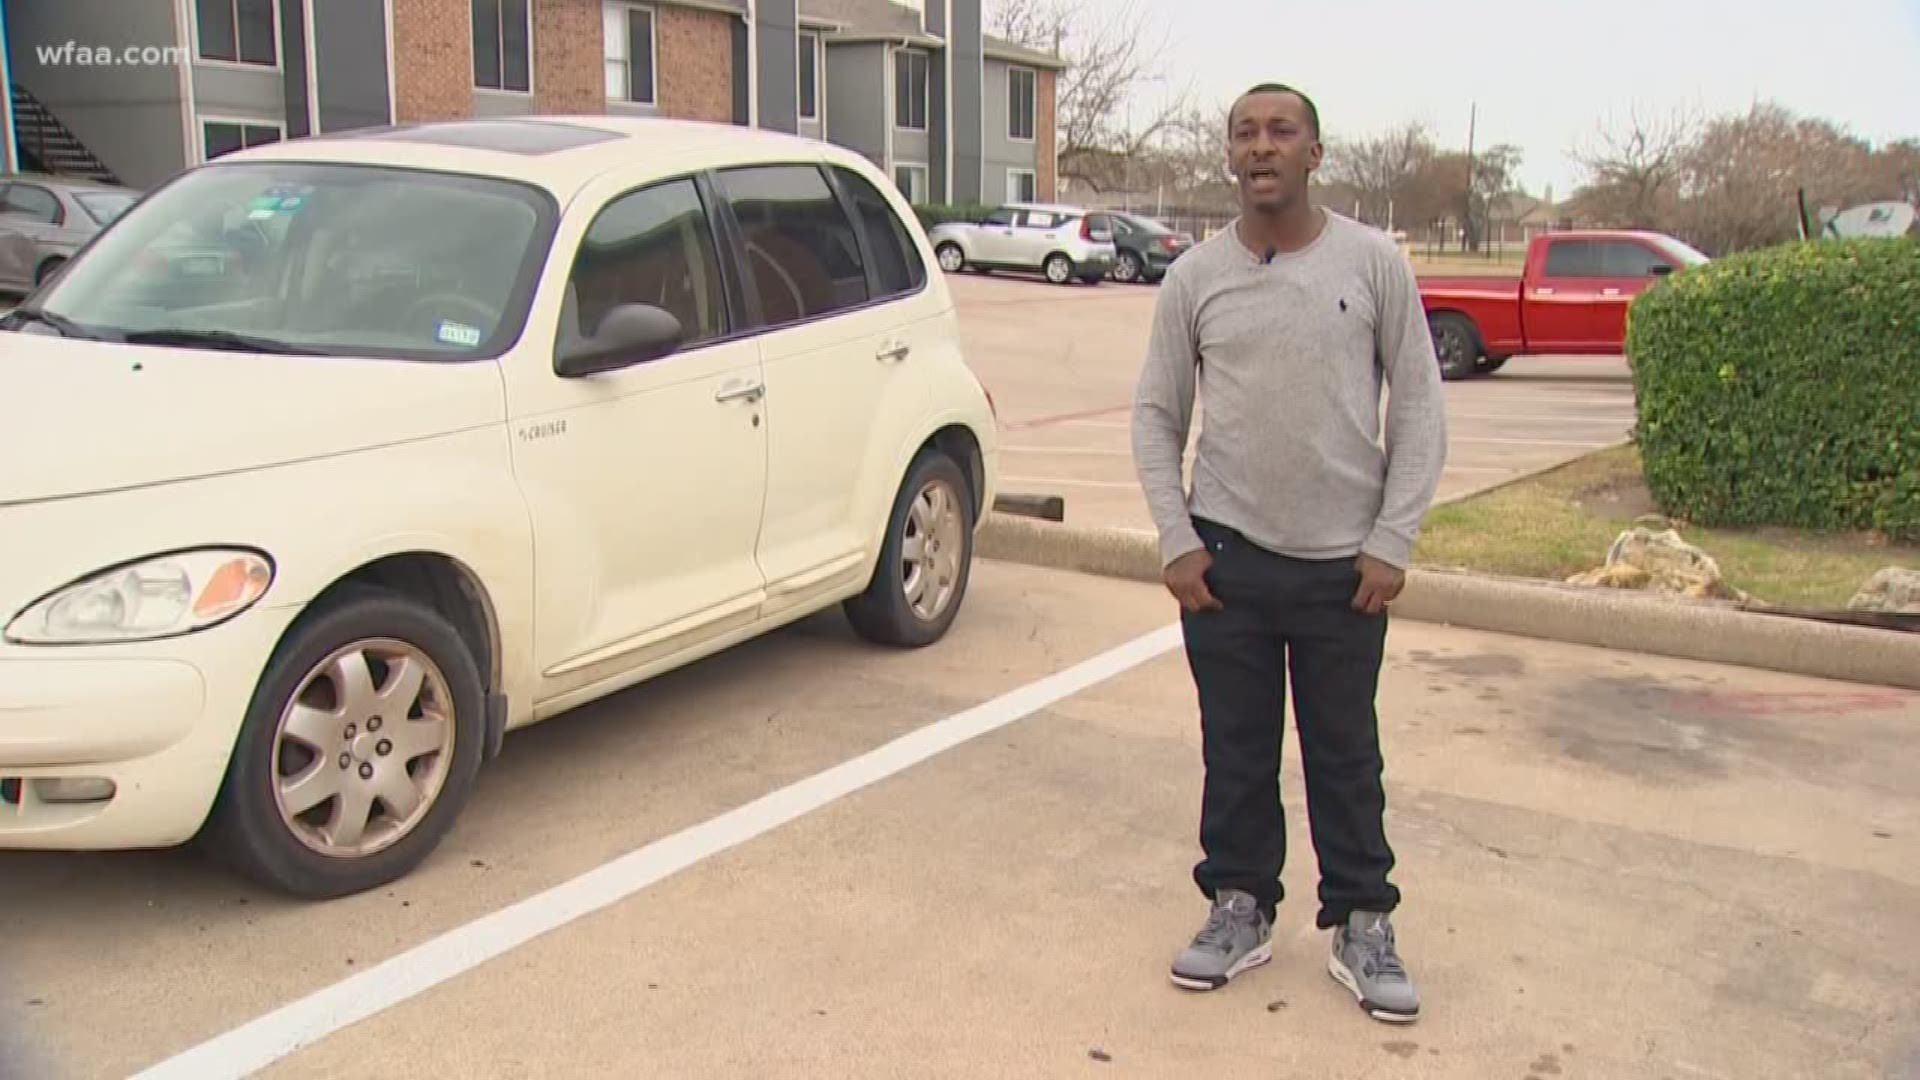 In Fort Worth, a couple claims they lost their jobs because they couldn't get to work when their vehicle was wrongly towed.